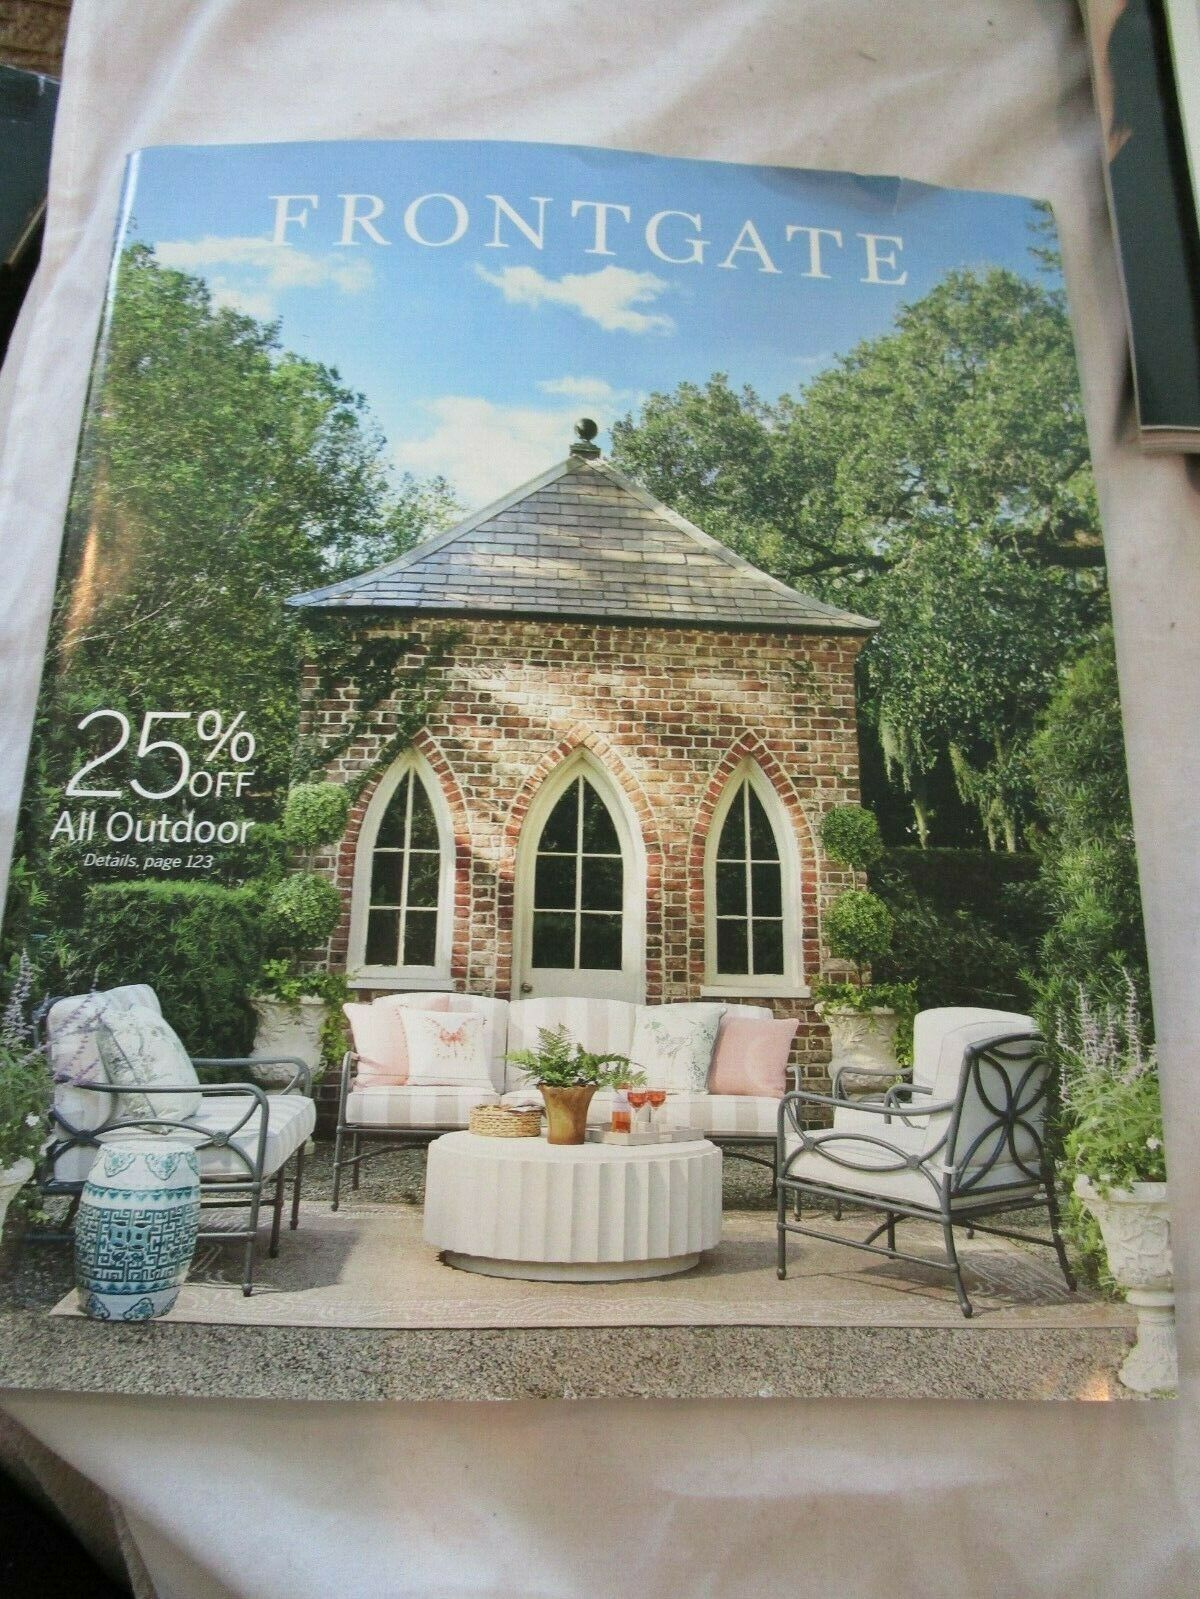 Frontgate Front Gate Catalog February 2020 Outfitting America's Homes